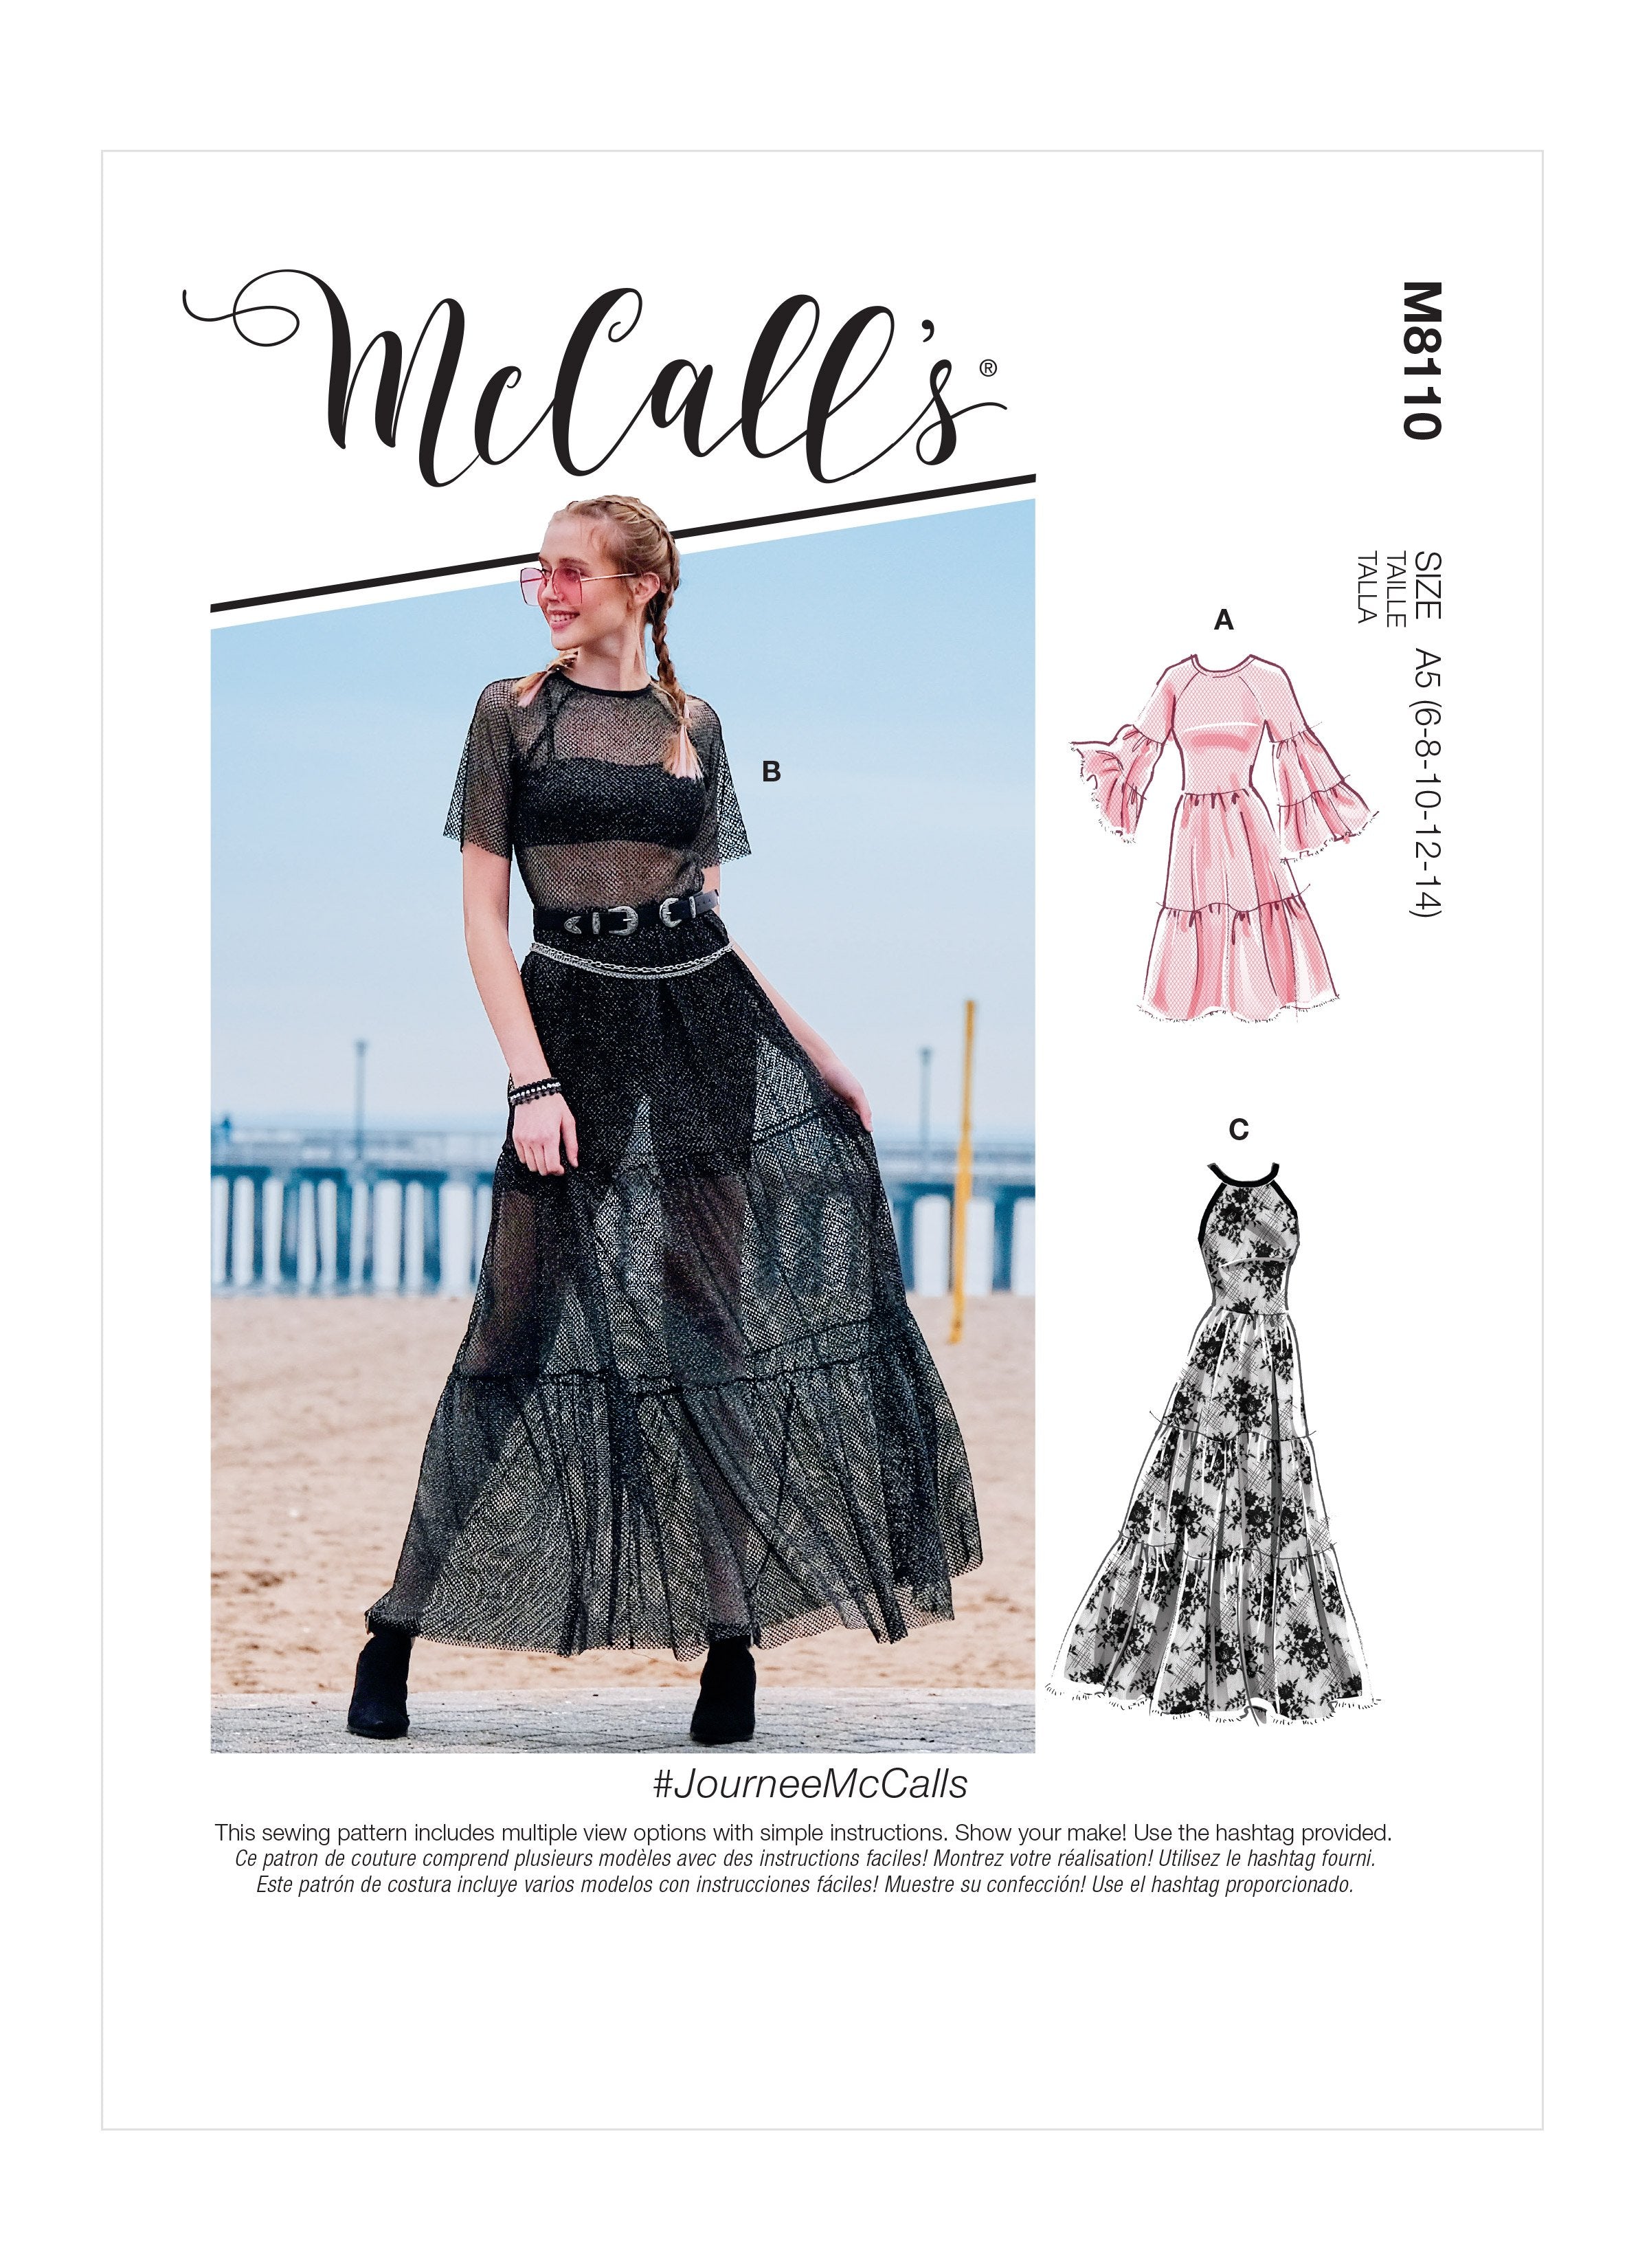 McCall's 8110 Dresses sewing pattern #JourneeMcCalls from Jaycotts Sewing Supplies